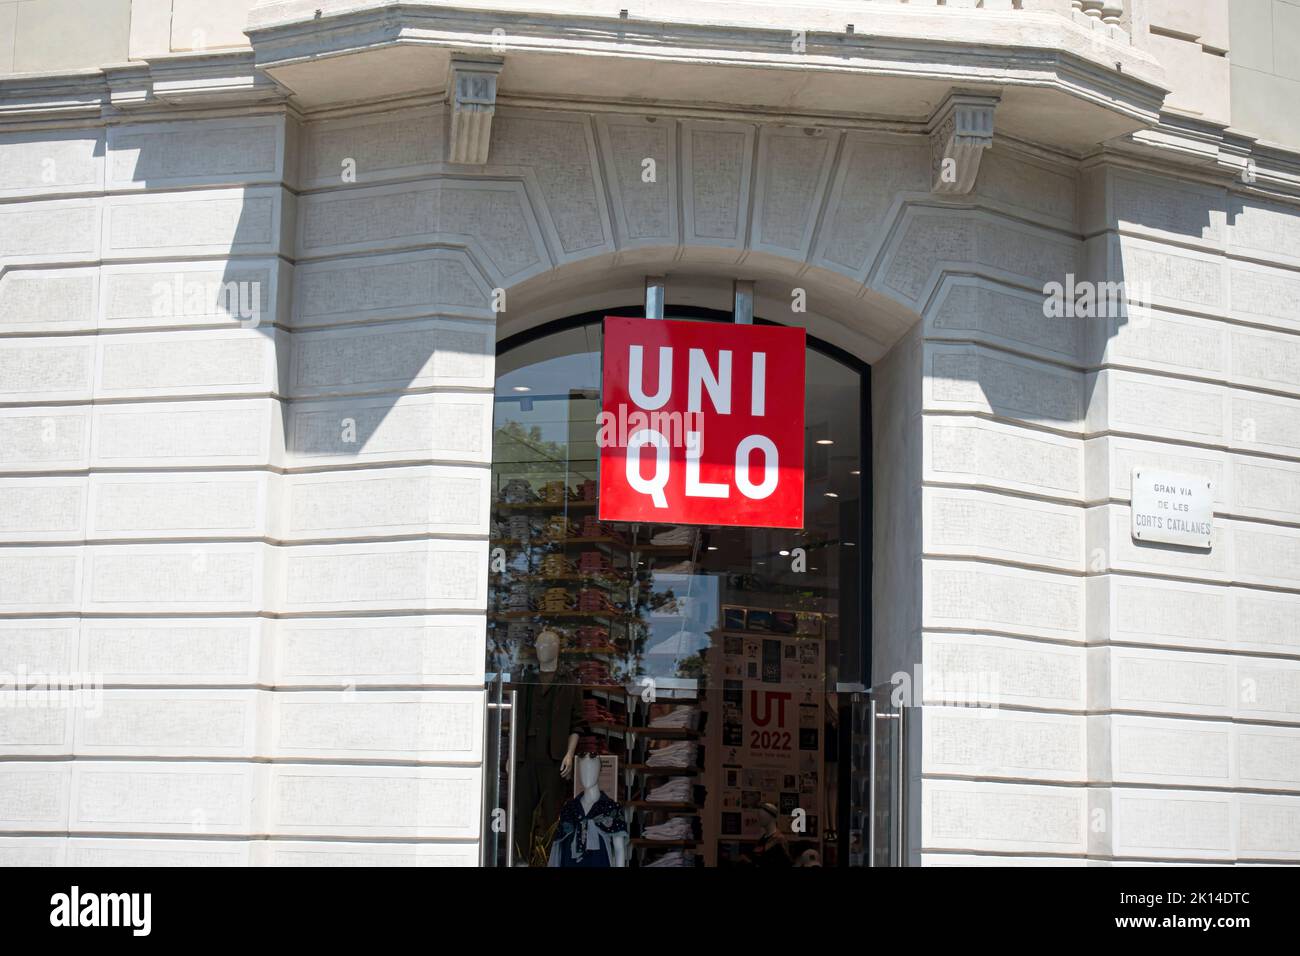 Barcelona, Spain - May 9, 2022. Uniqlo clothing store shop front. Uniclo is a Japanese casual wear designer, manufacturer and retailer Stock Photo